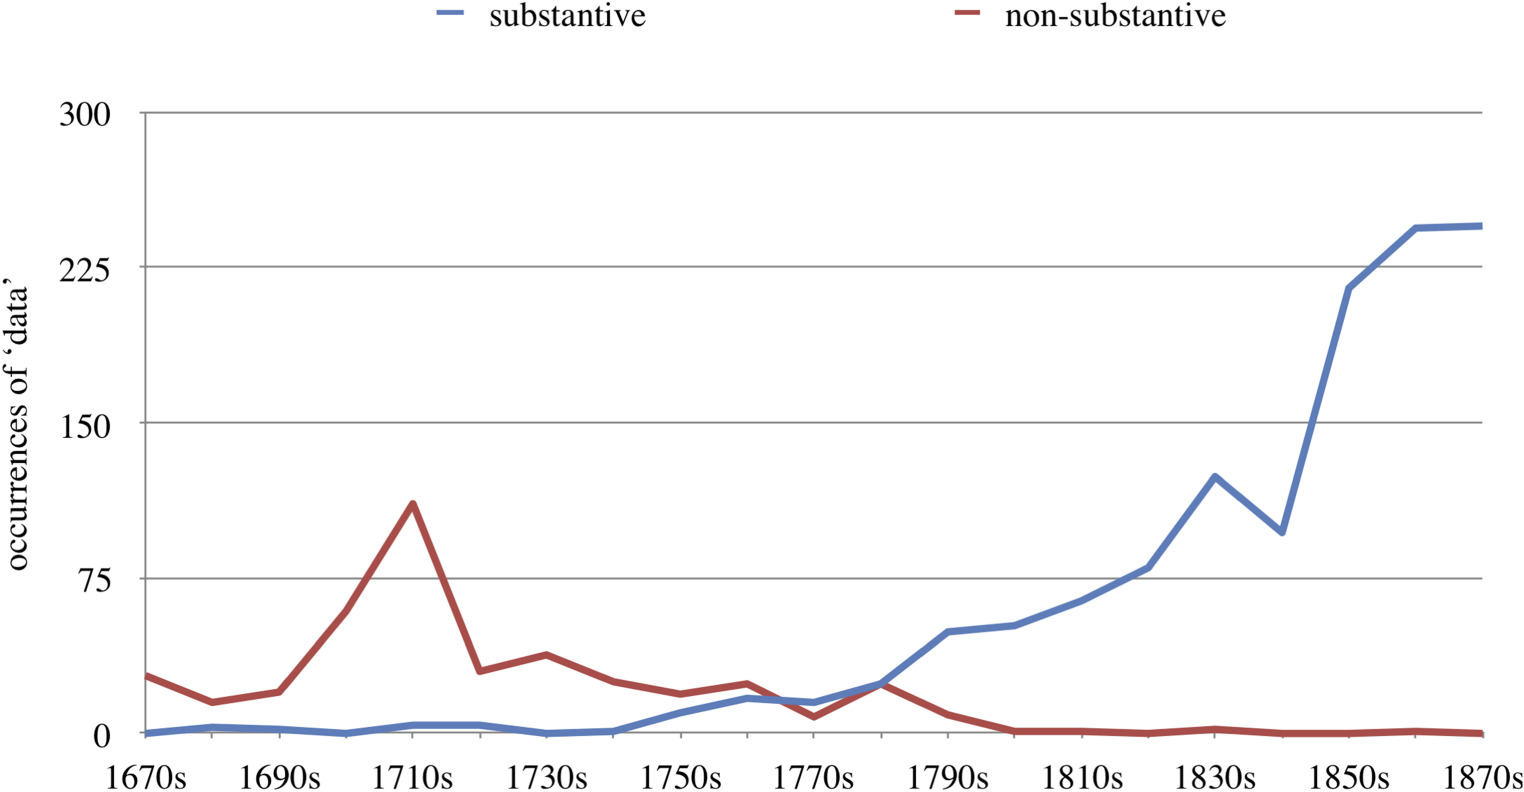 Number of occurrences of the term ‘data’ in the Philosophical Transactions per decade, distinguishing between substantive and non-substantive uses